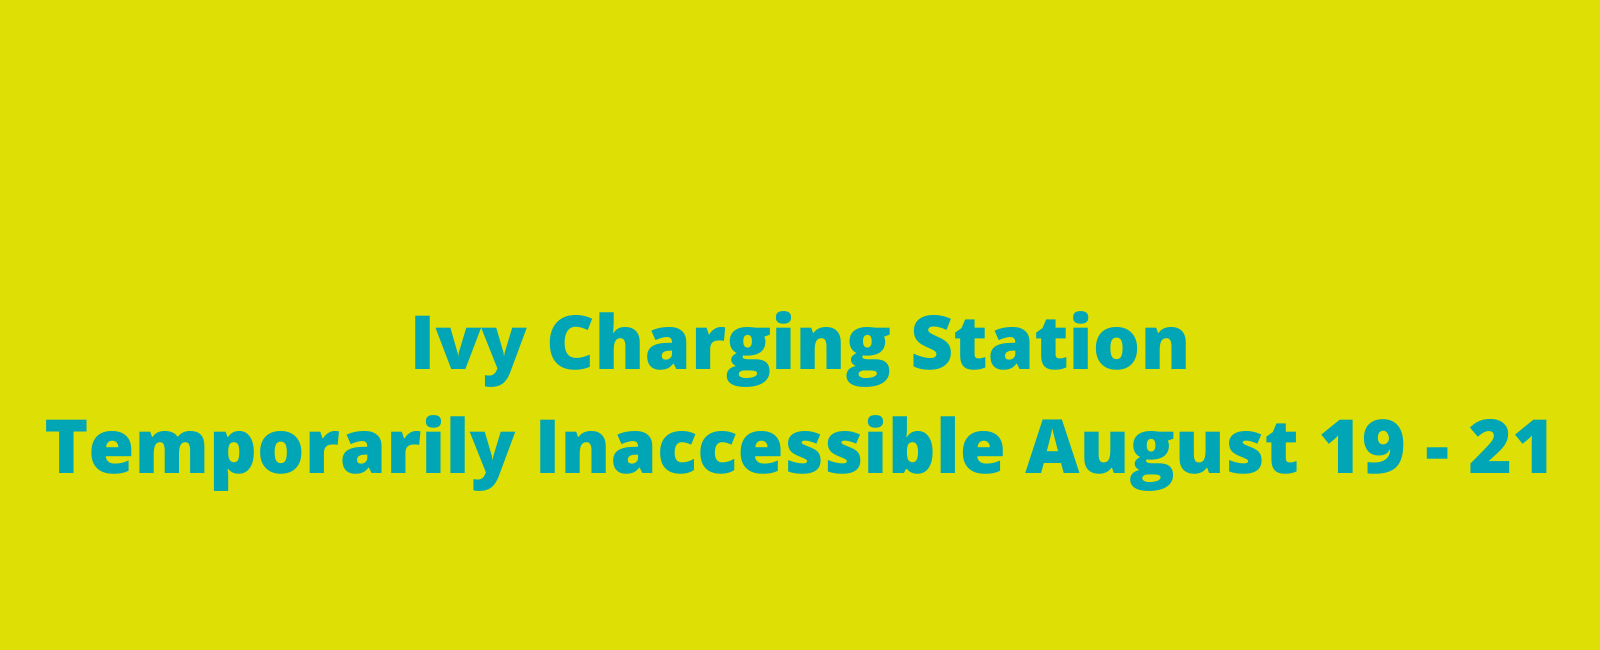 "Ivy Charging Station Temporarily Inaccessible August 19 - 21"